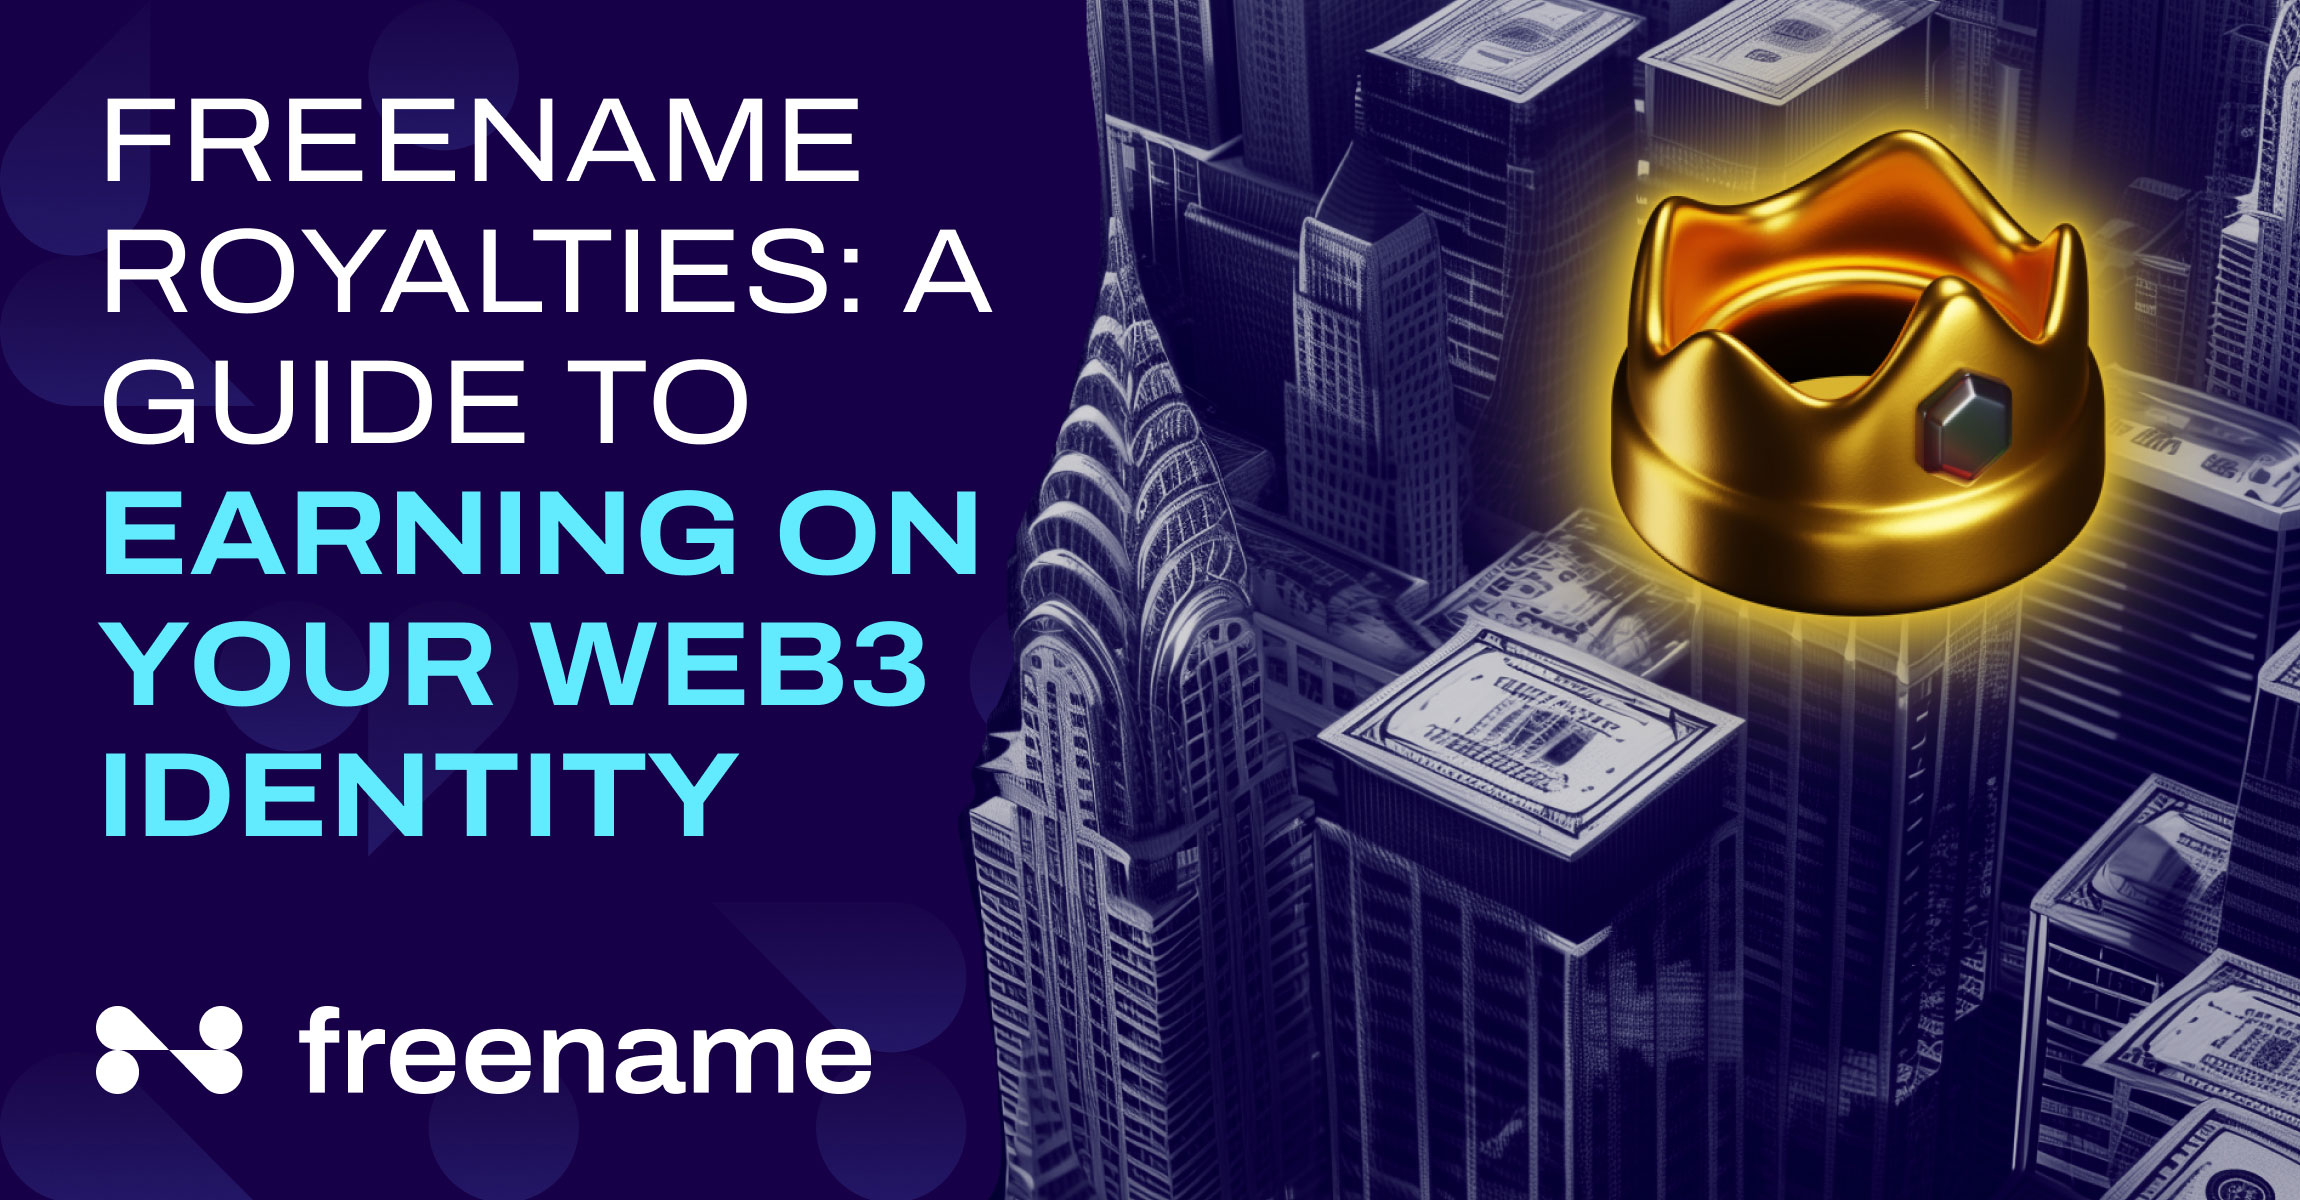 Freename Royalties: A Guide to Earning on Your Web3 Identity